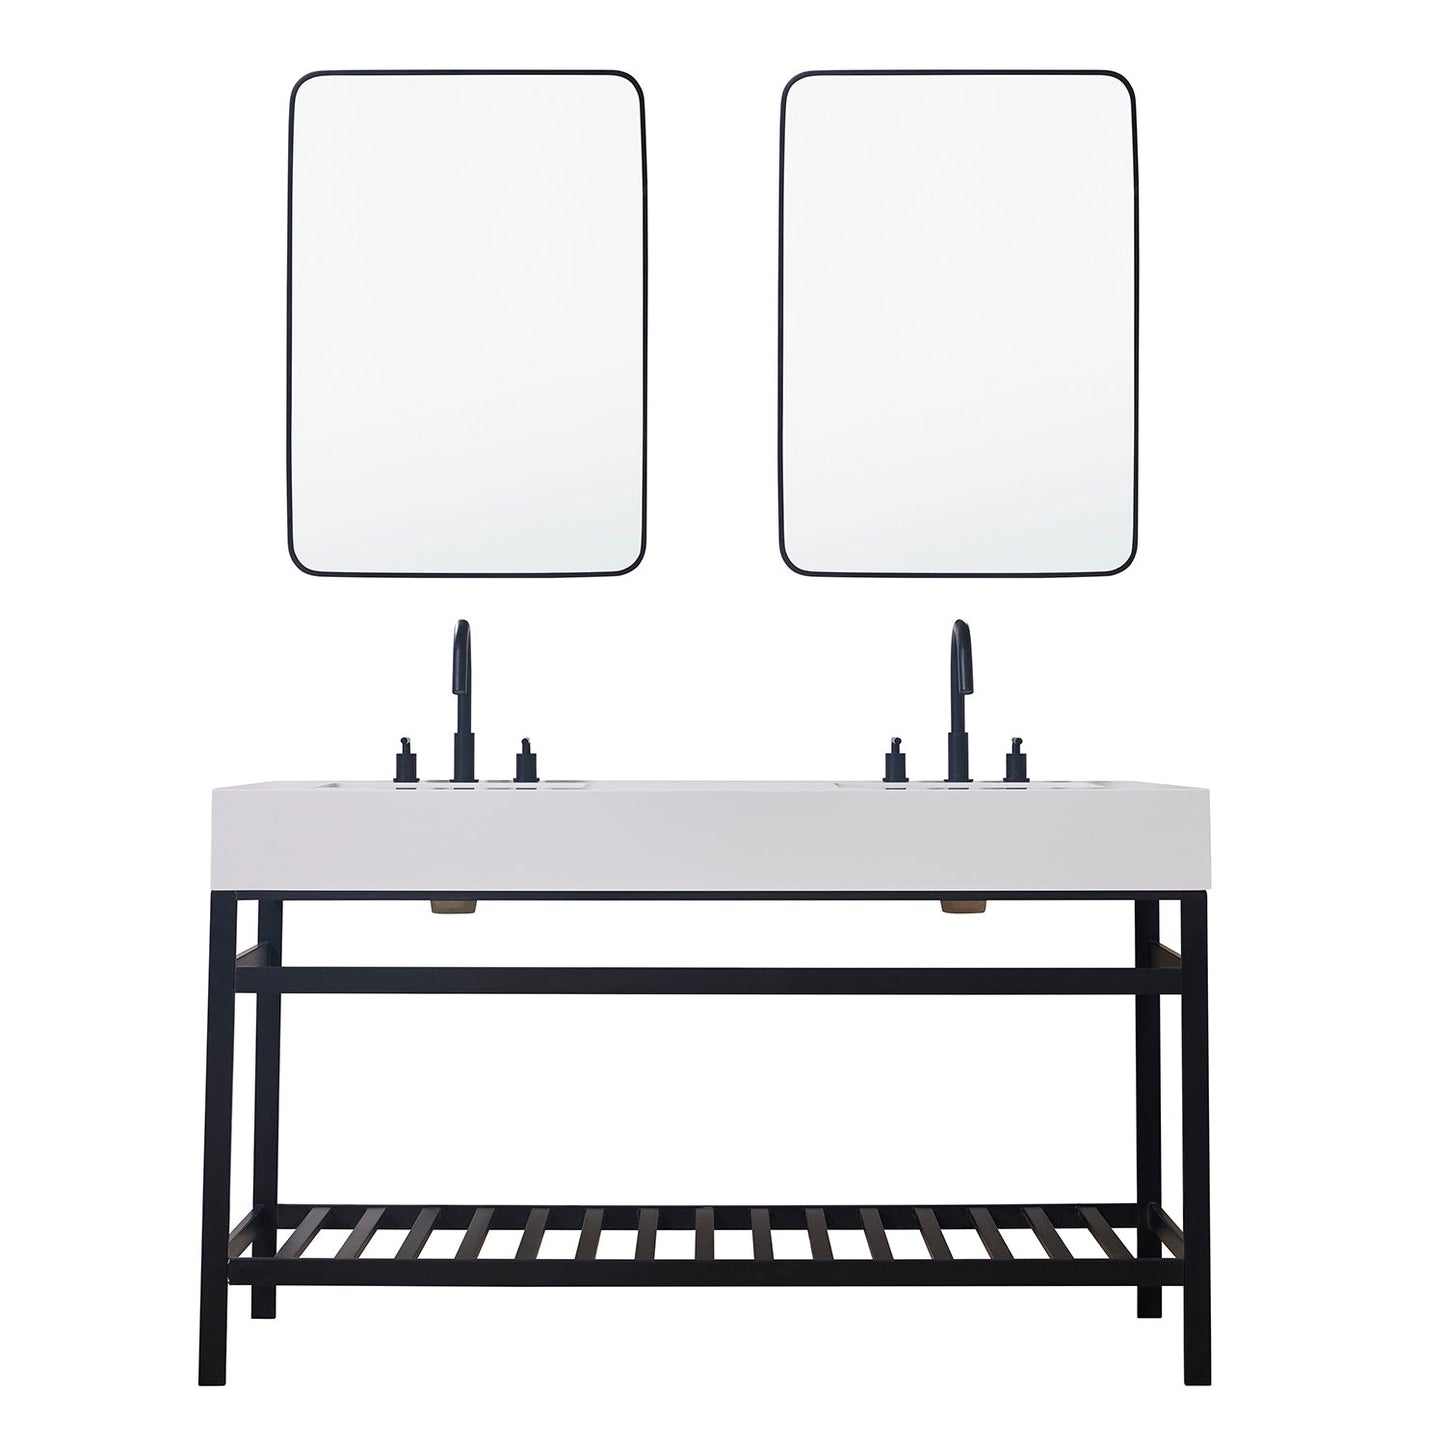 Edolo 60" Double Stainless Steel Vanity Console in Matt Black with Snow White Stone Countertop and Mirror